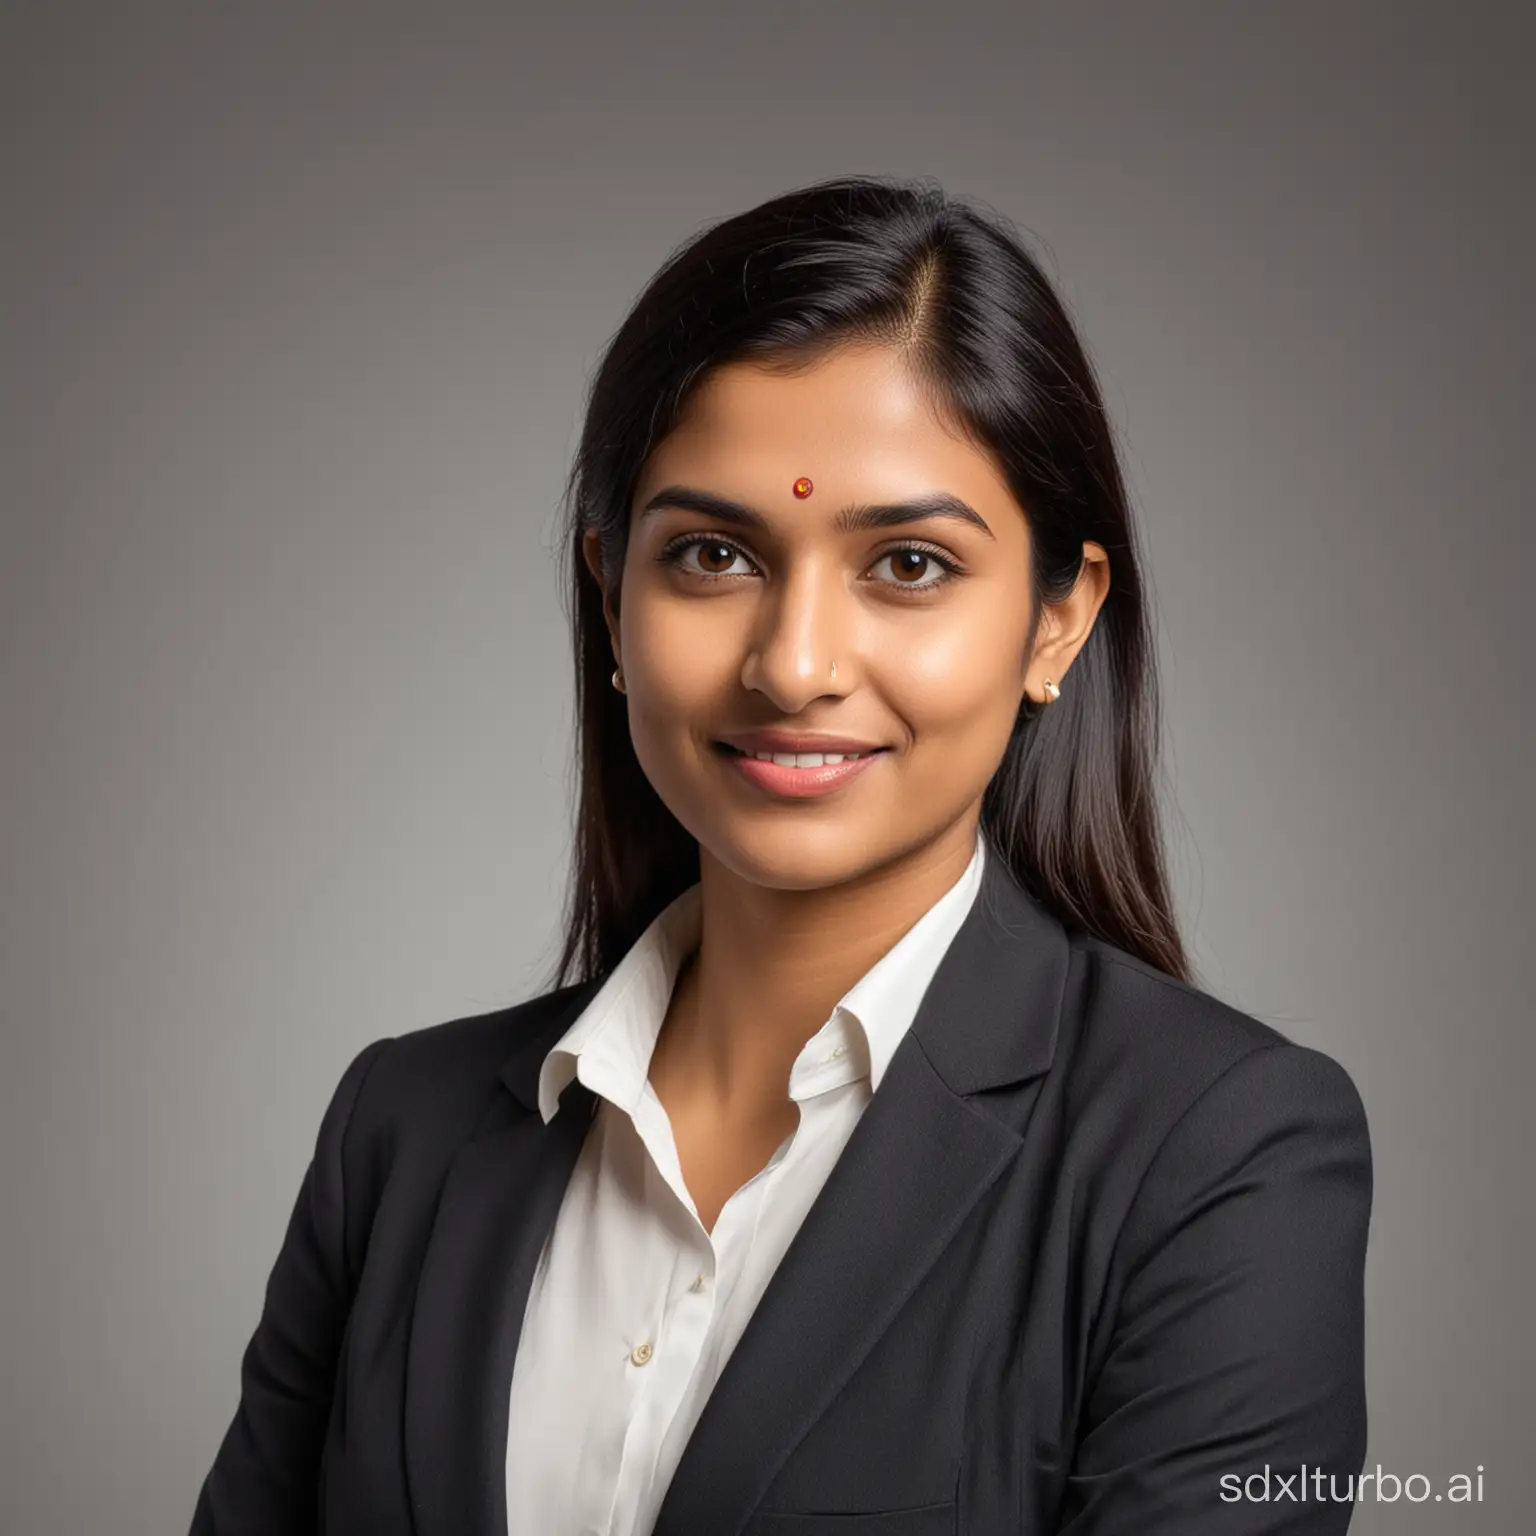 Profile photo for linkedin of an Indian women dressed for office